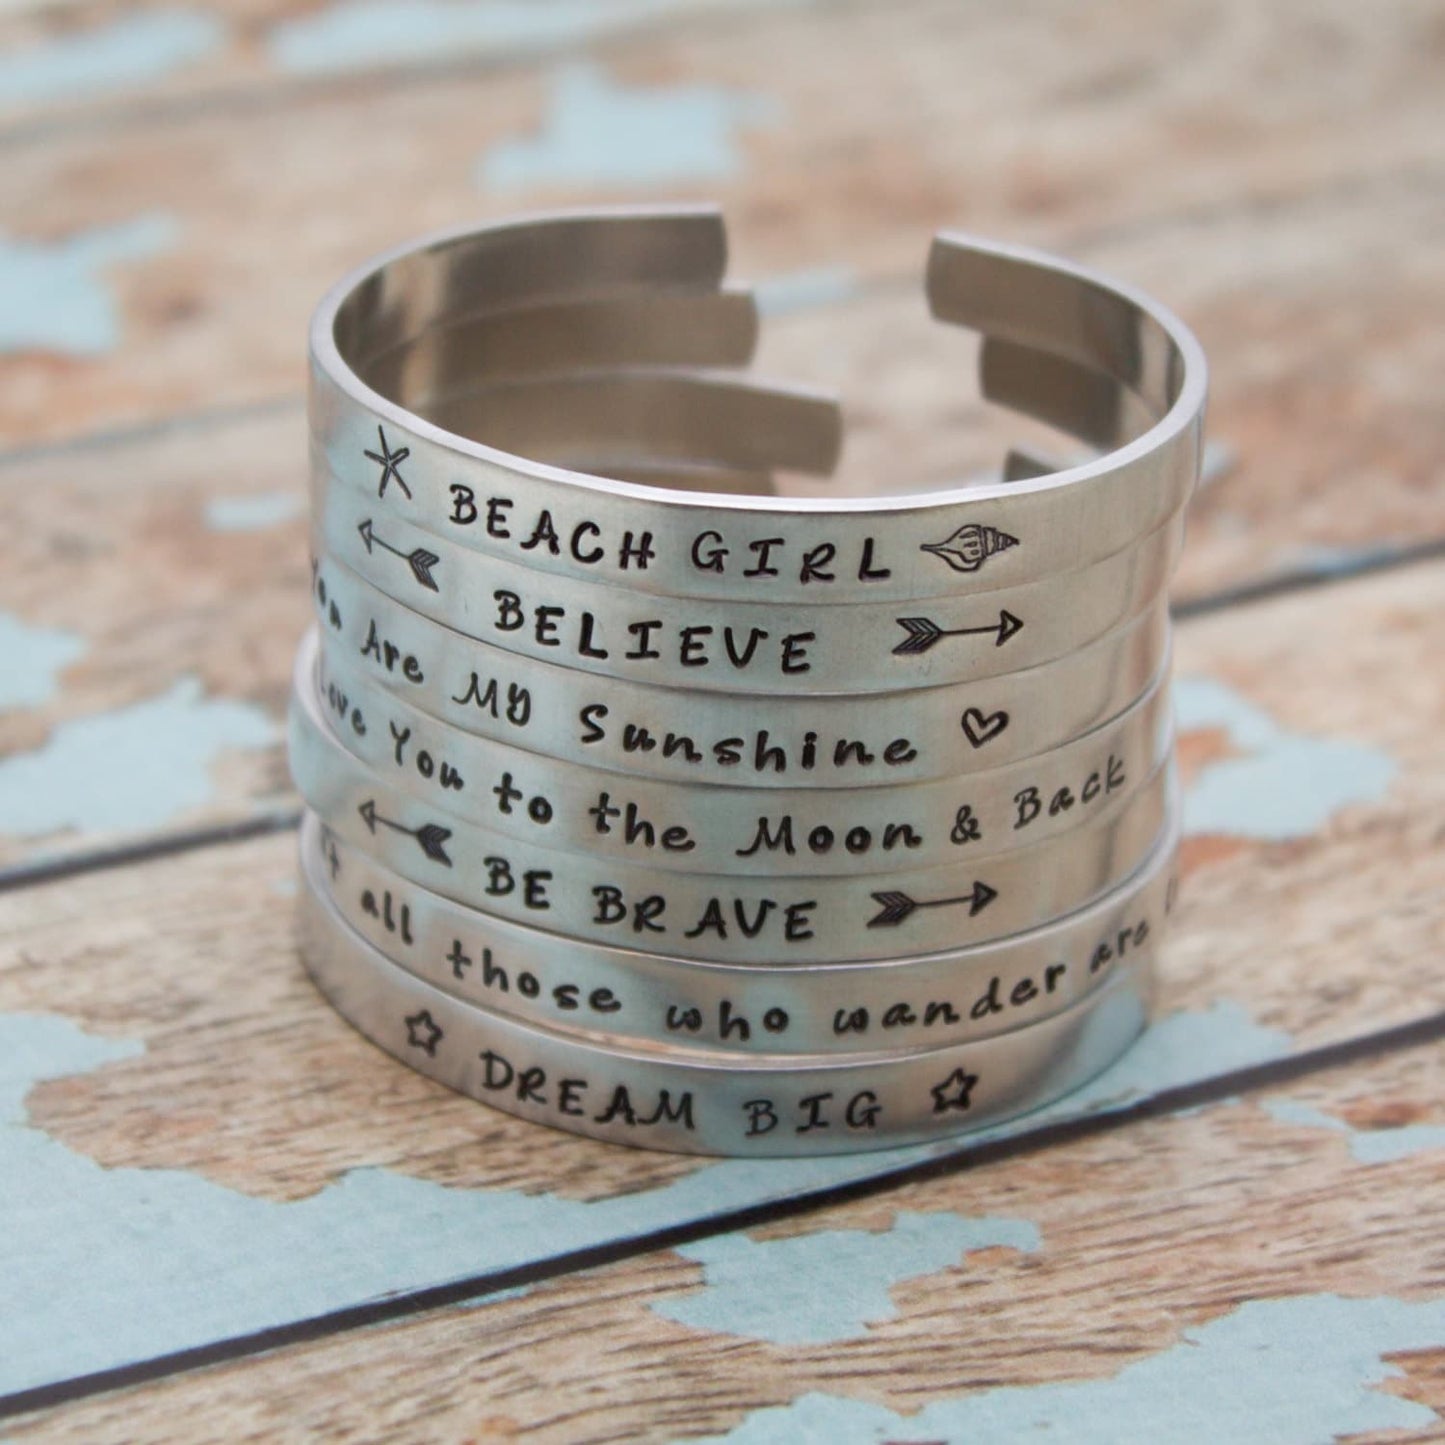 Personalized Hand Stamped Cuff Bangle Bracelet Your Favorite Quote or Names